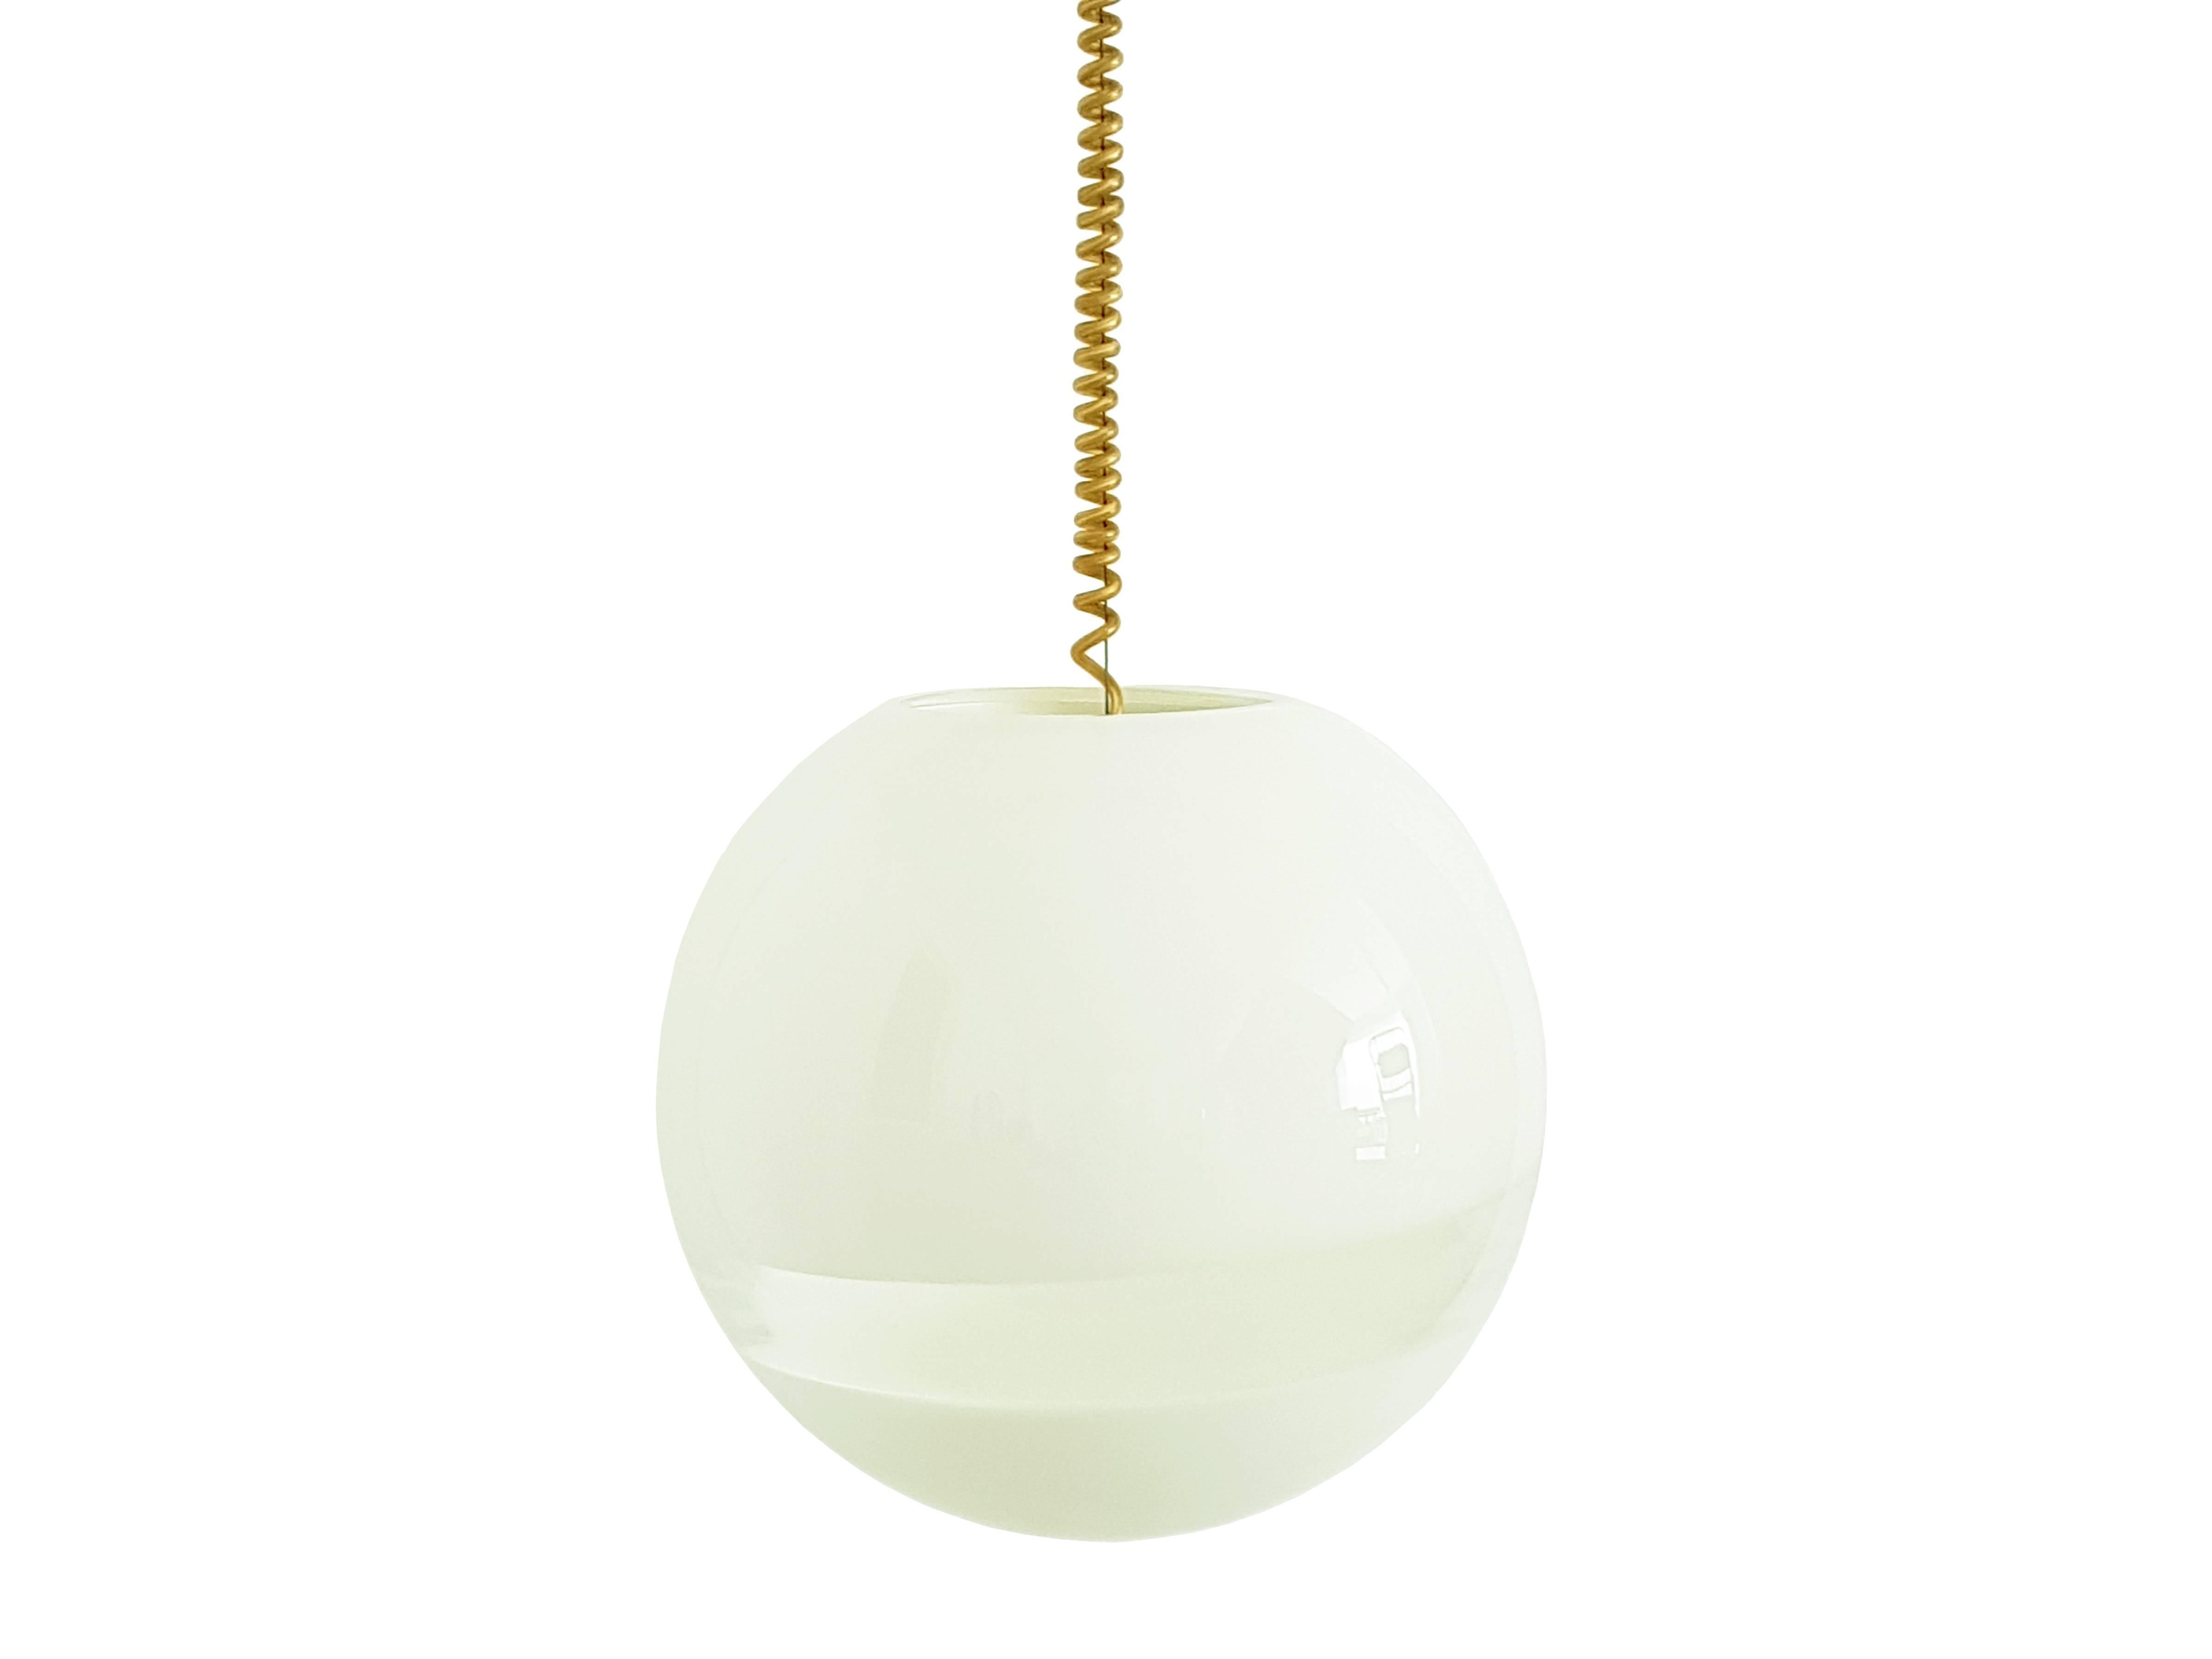 Space Age Spherical White and Clear 1960s Murano Glass Pendat by Roberto Pamio for Leucos